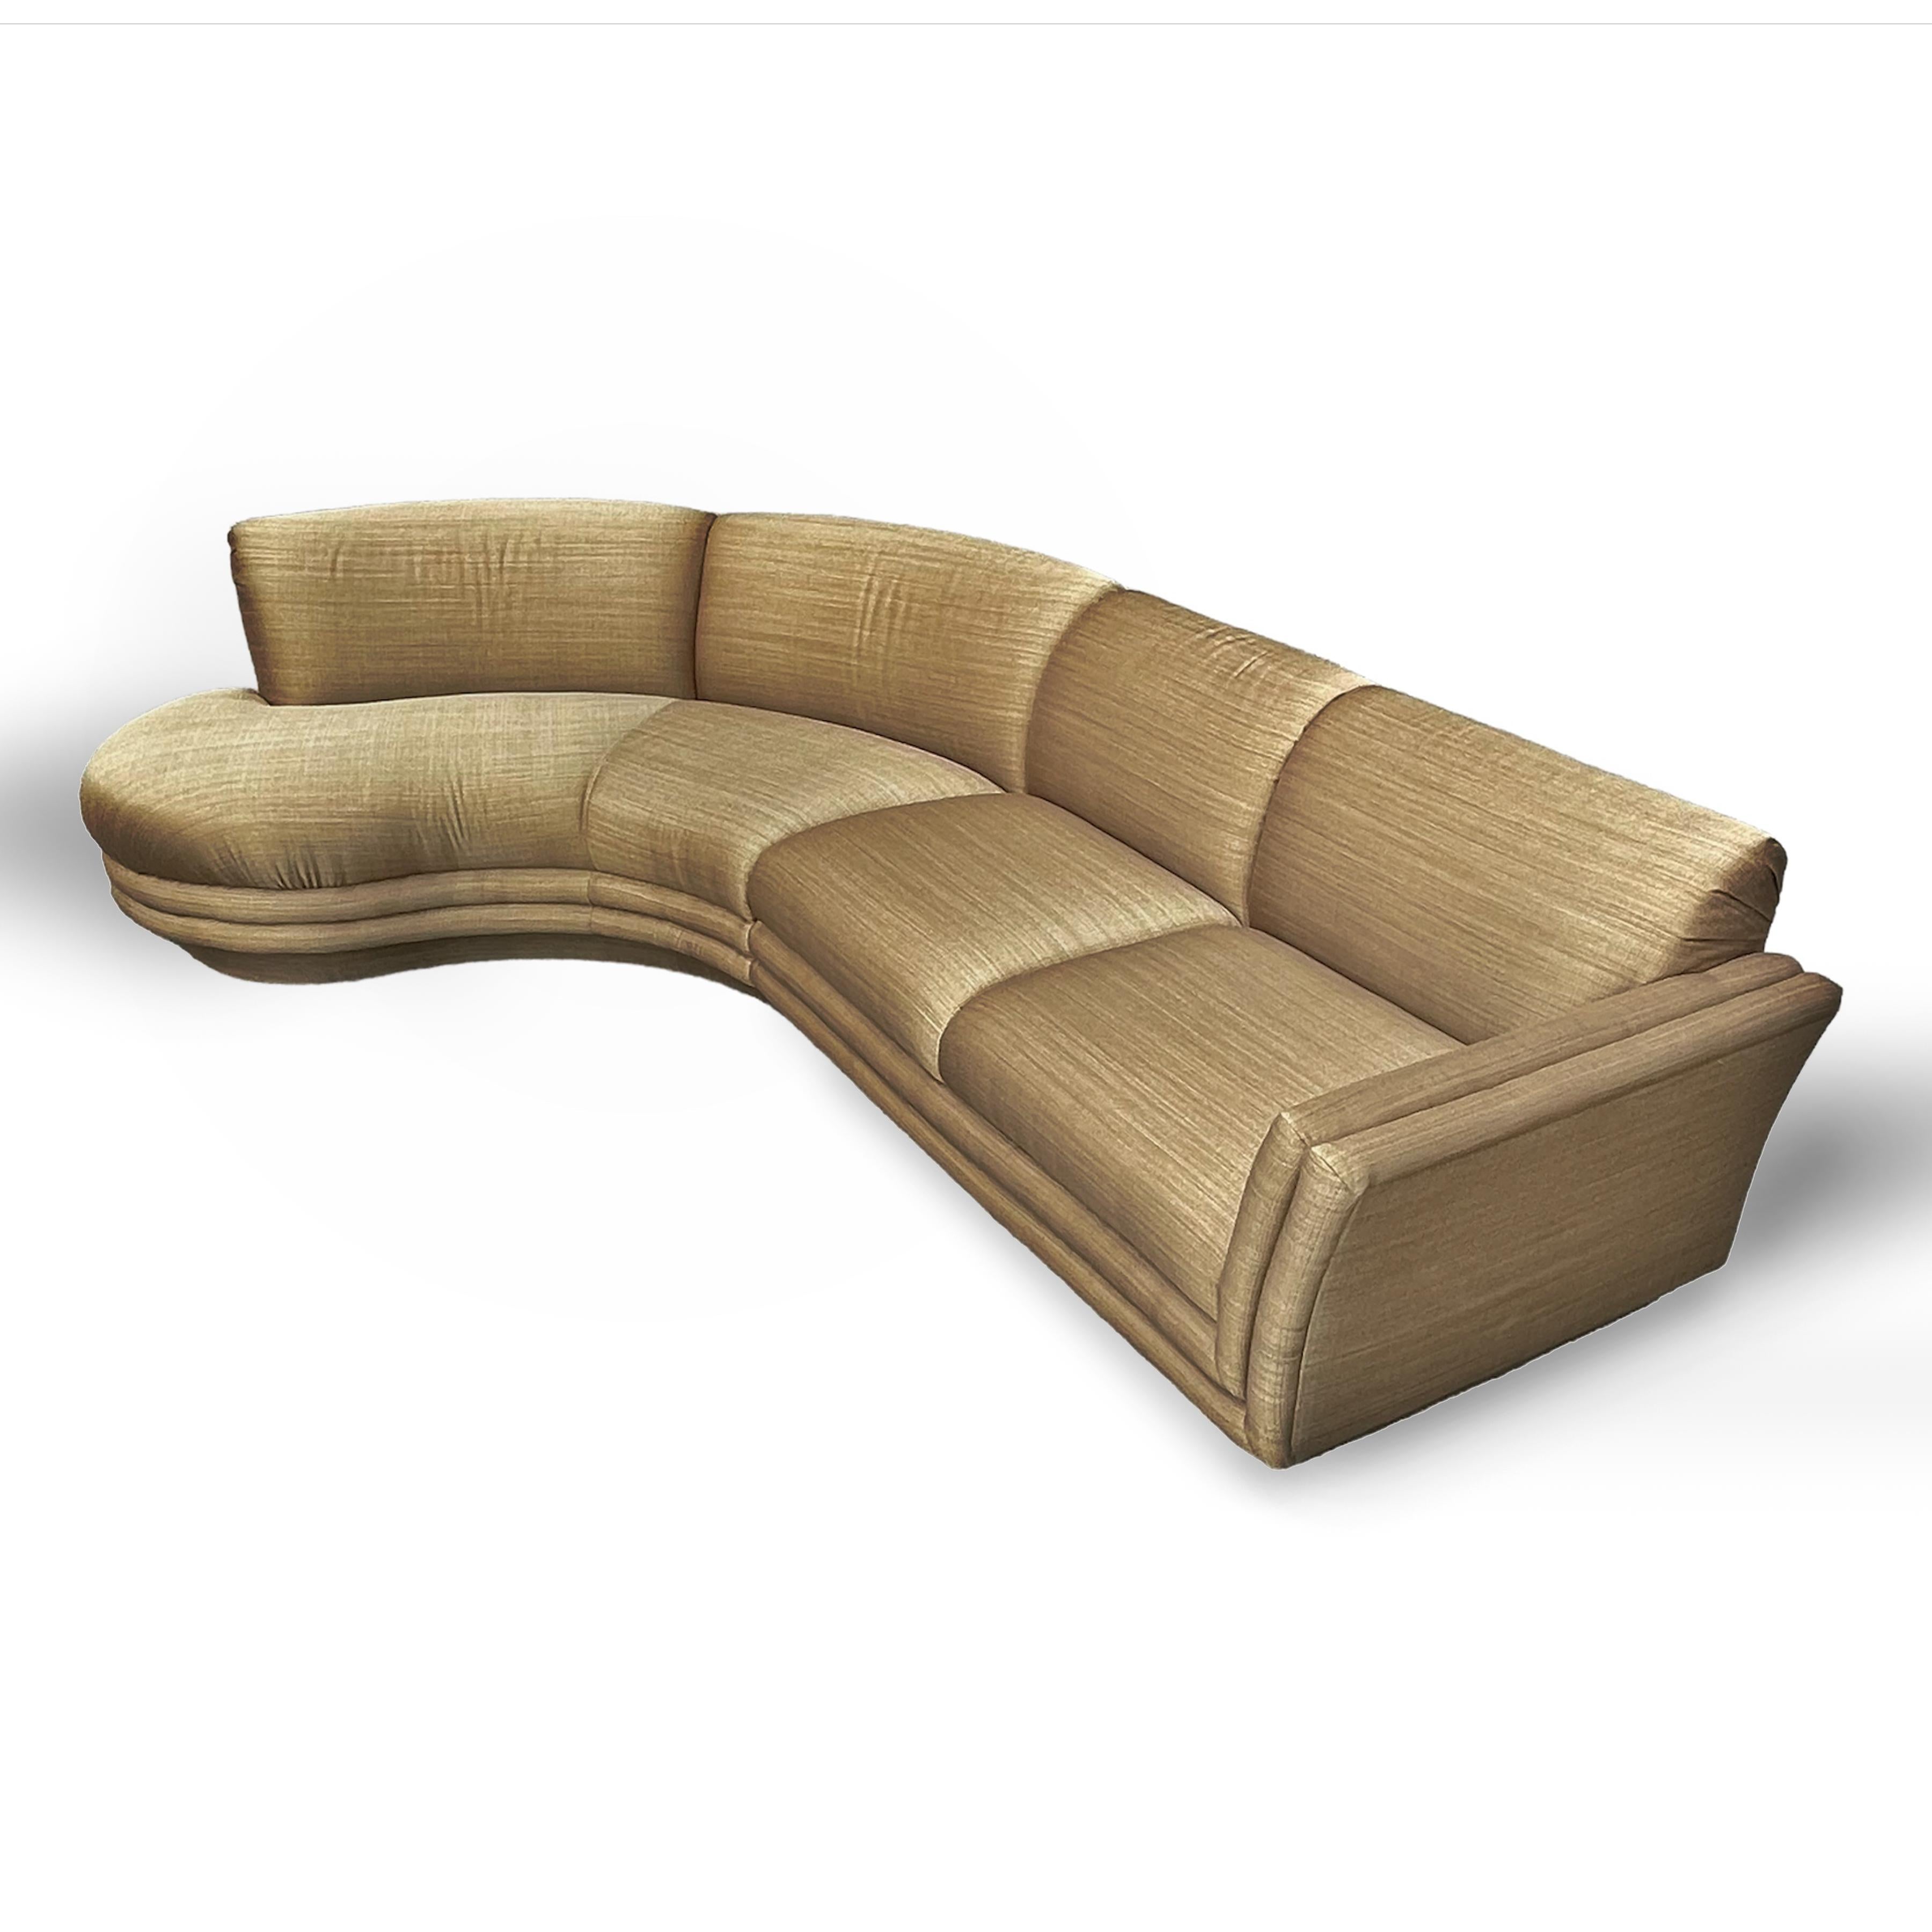 American Cloud Sofa by Weiman Preview